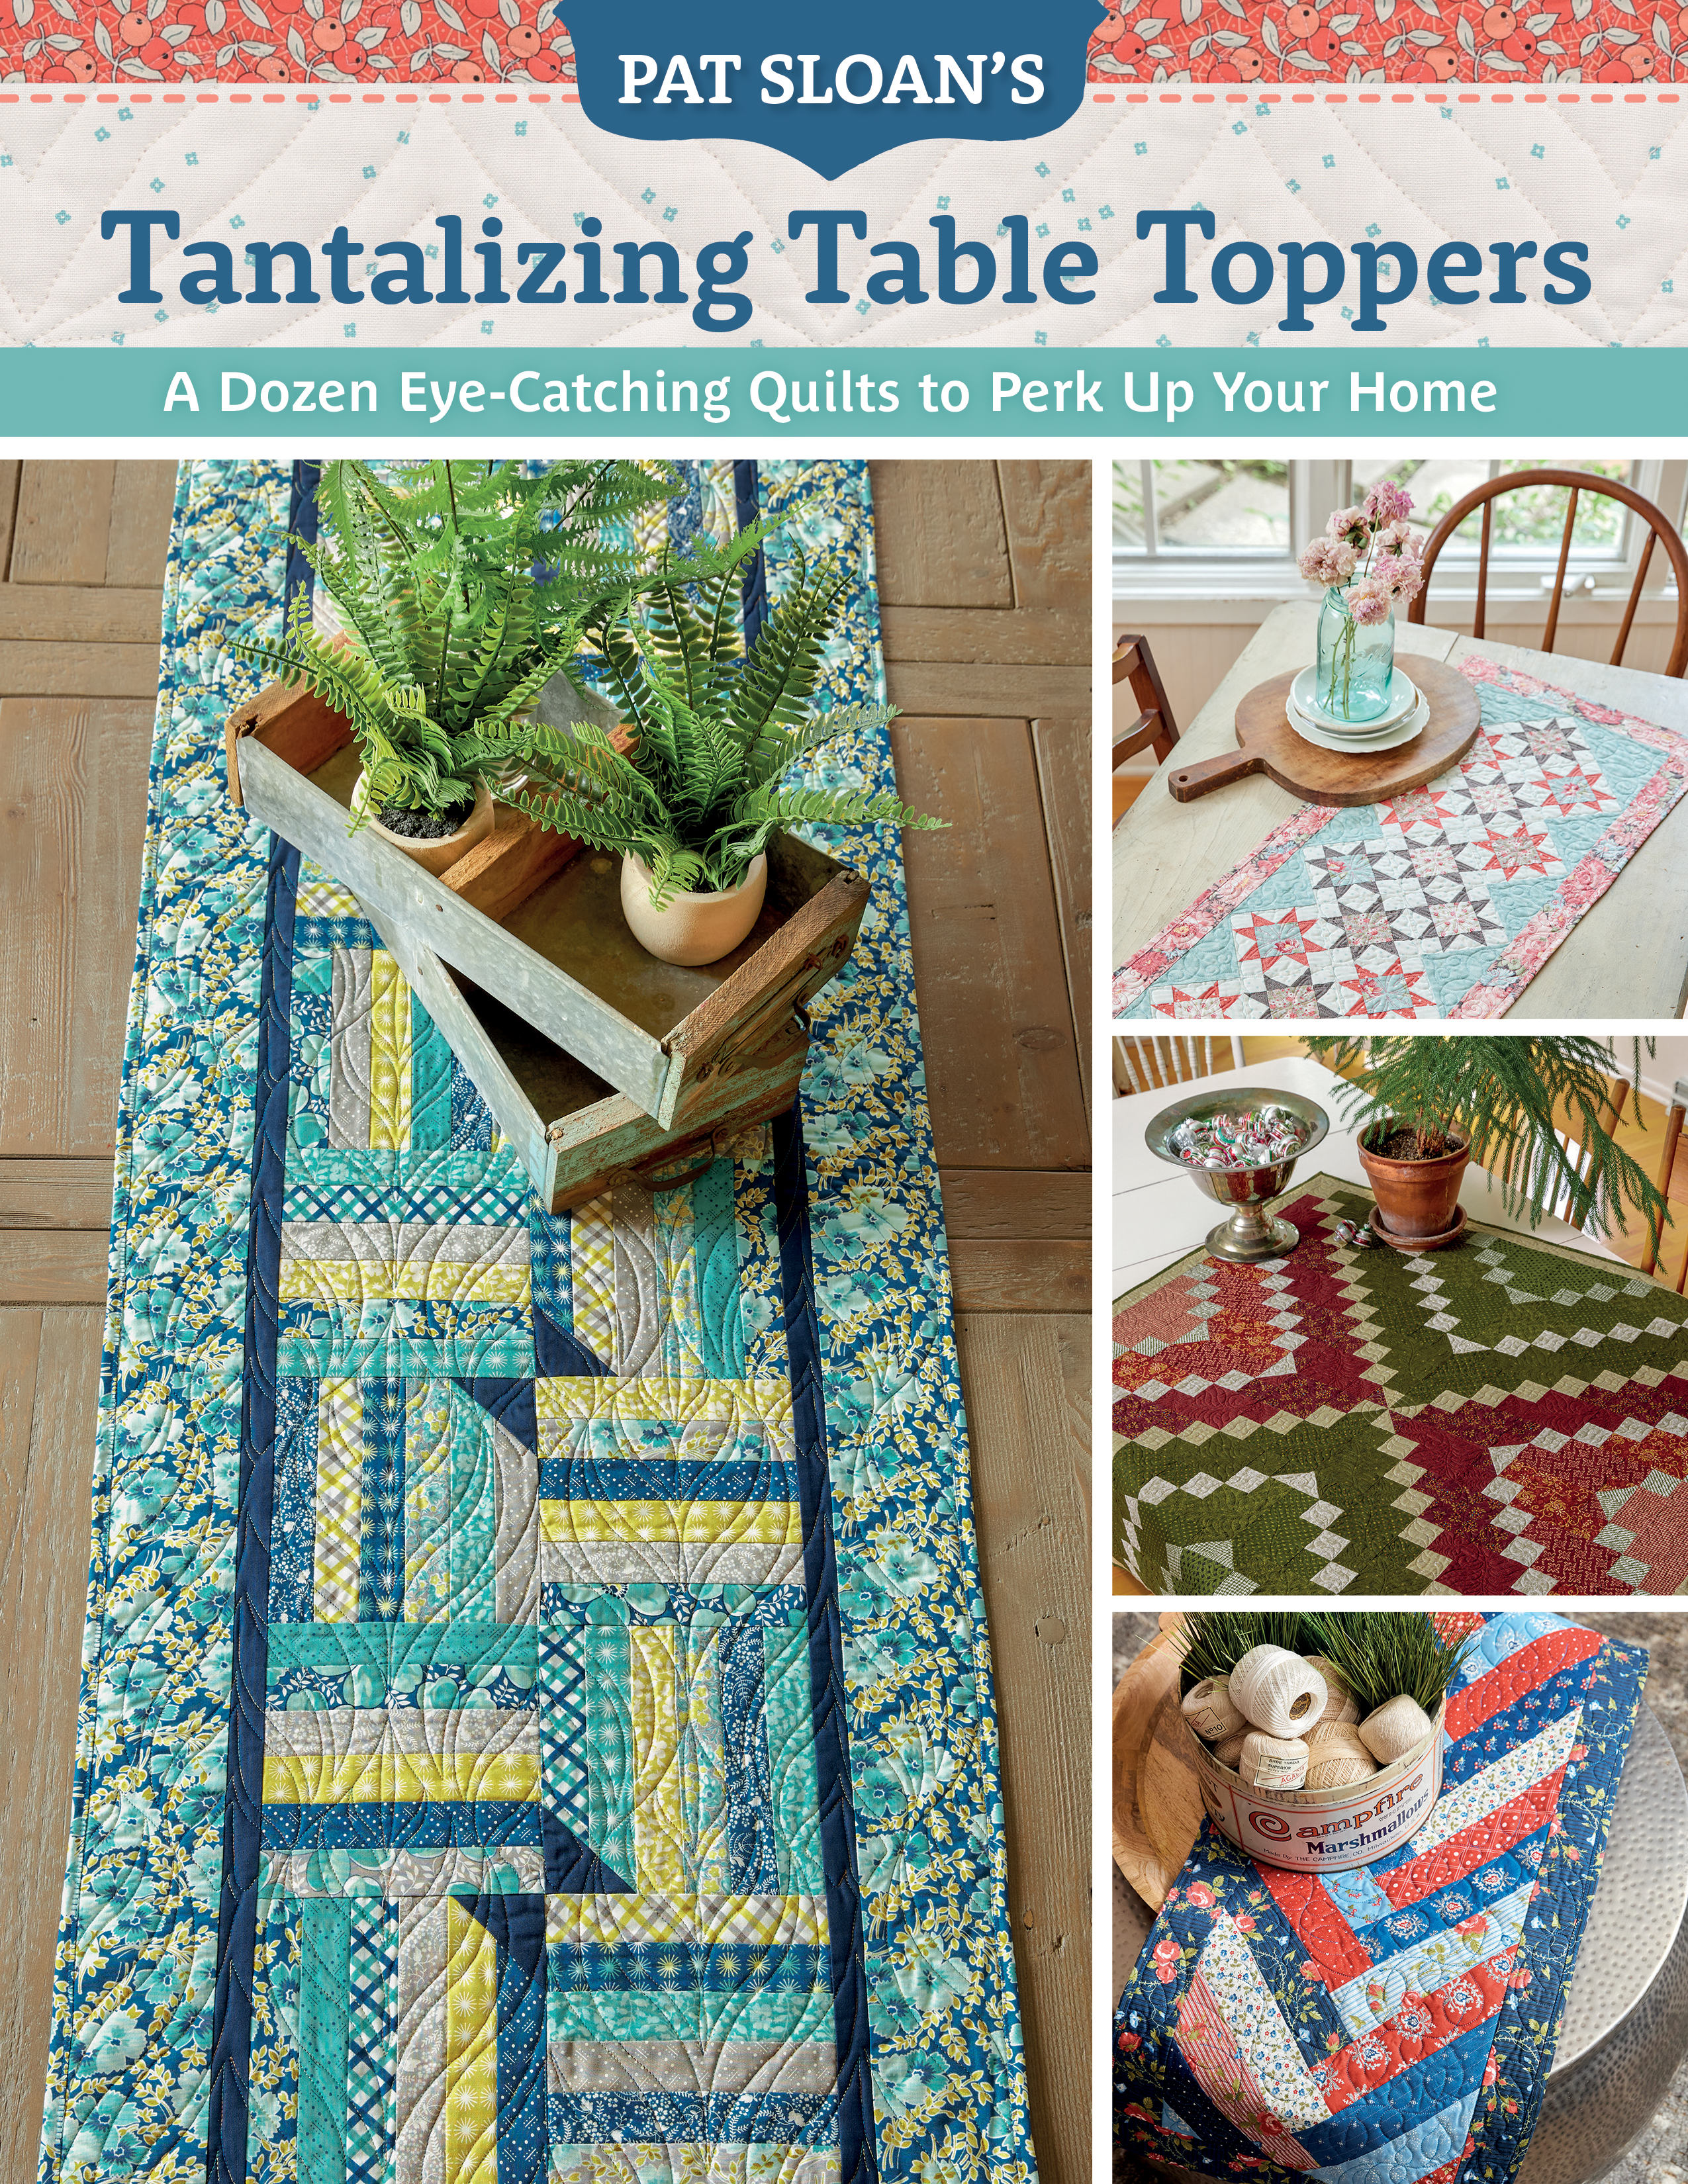 Pat Sloan's Tantalizing Table Toppers